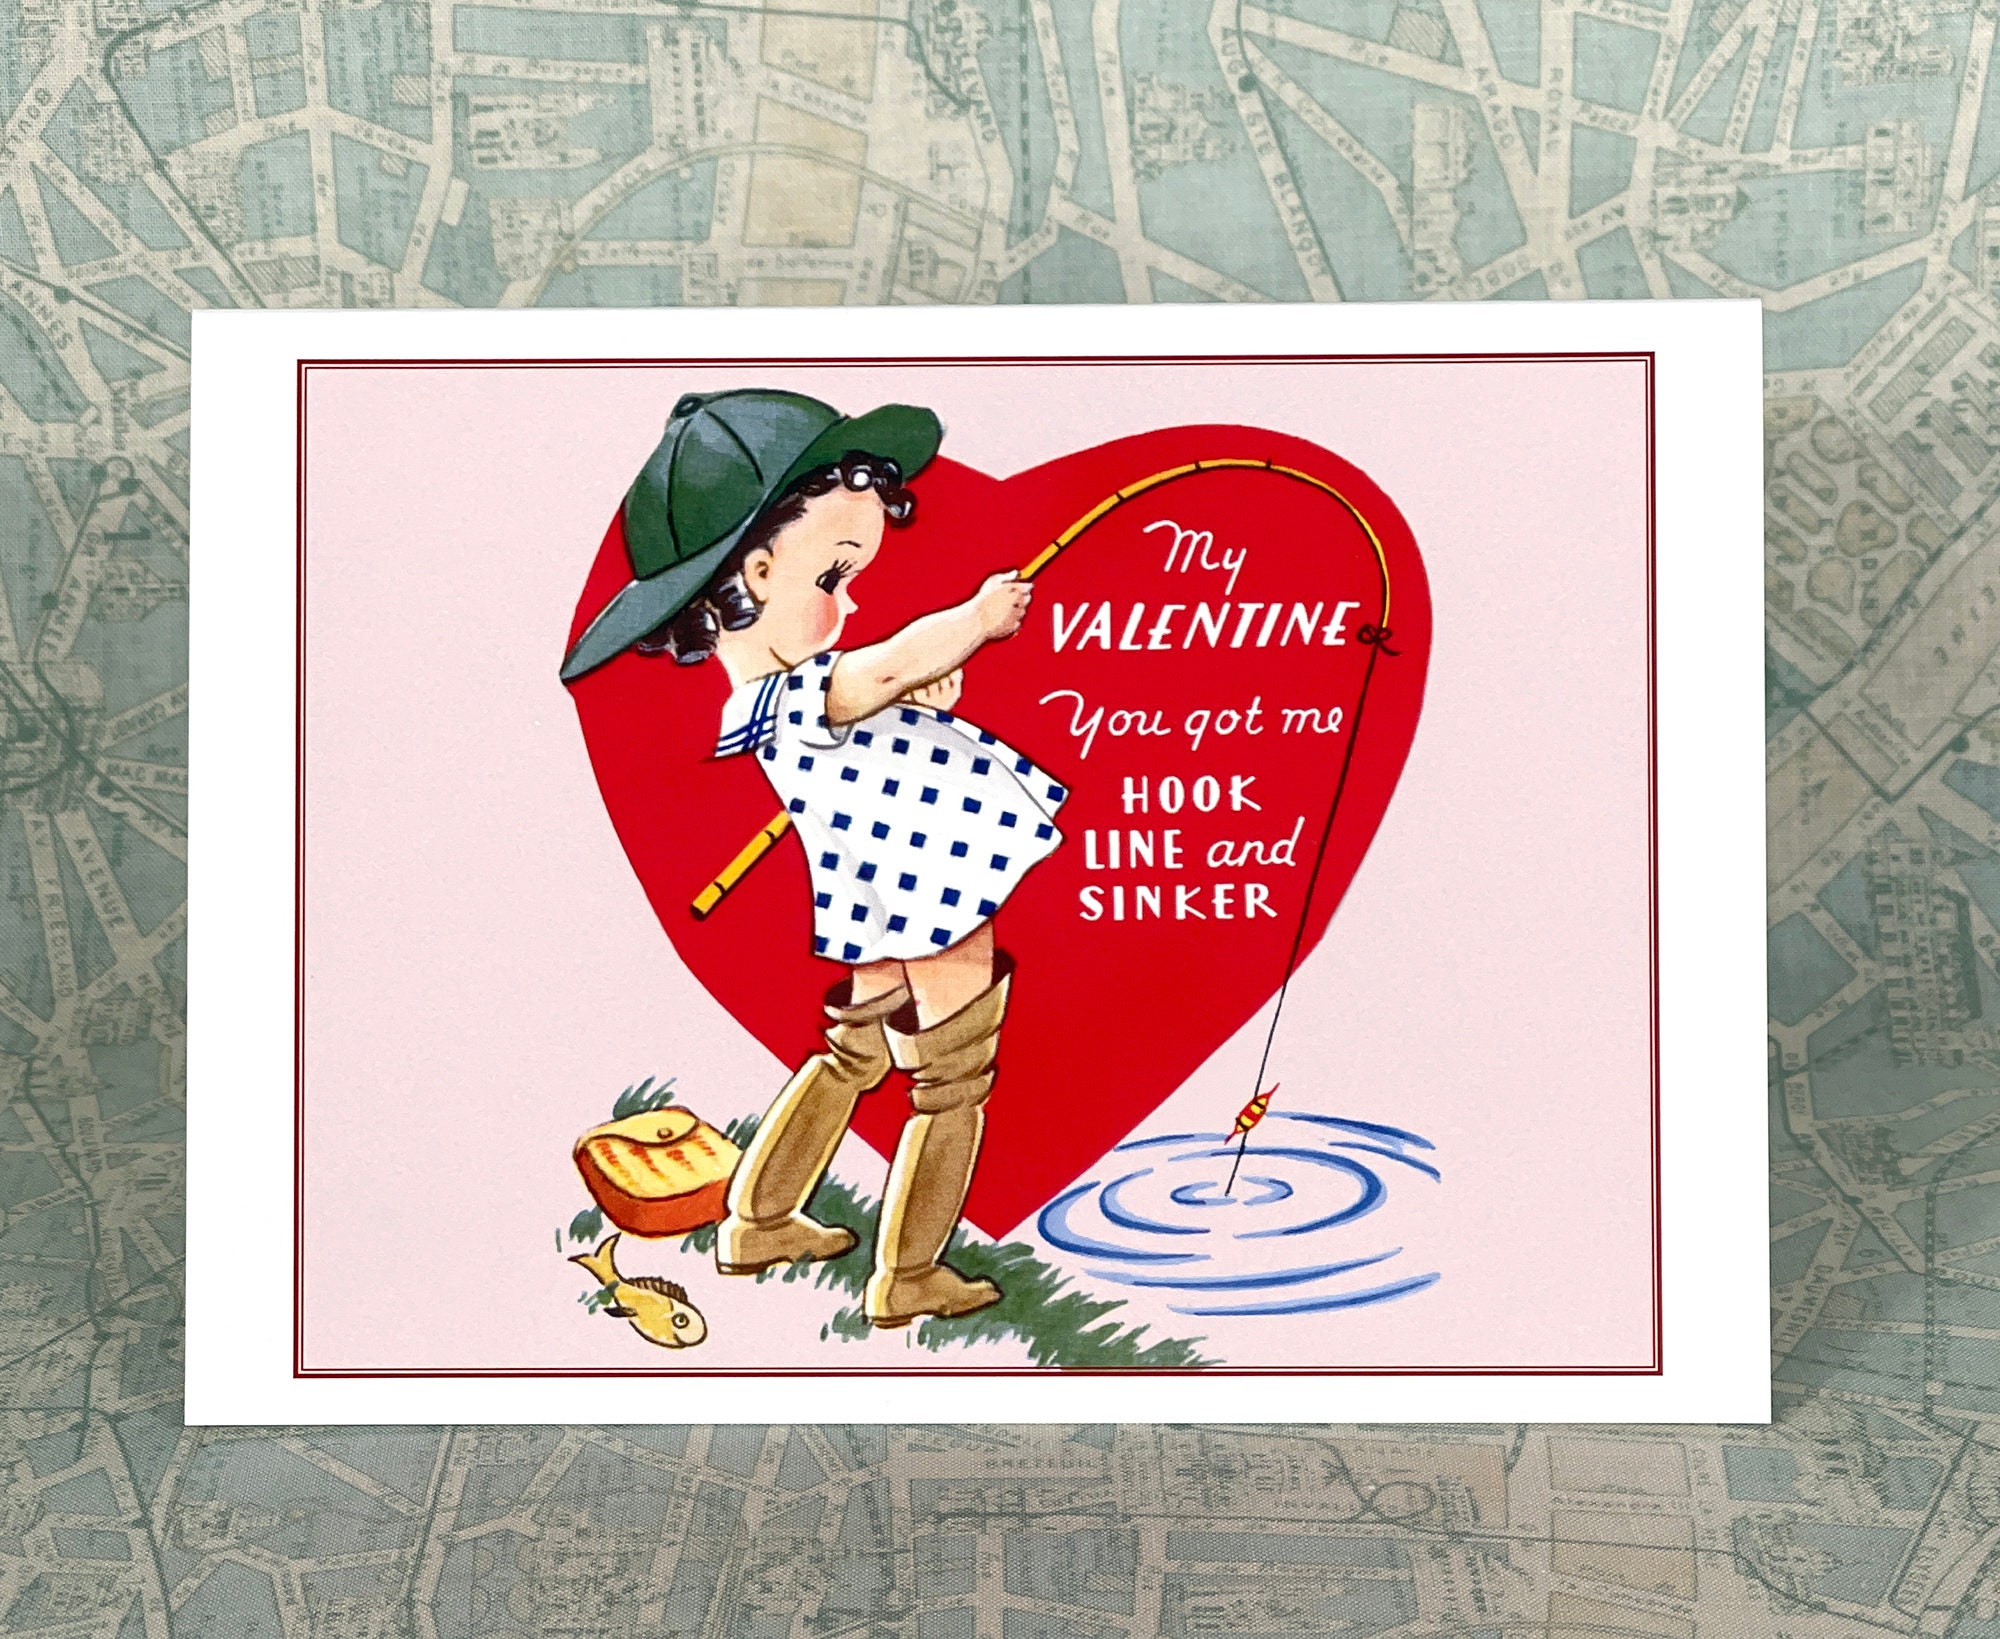 Vintage Unused Valentine Card With Bear Diving Into Water Swimming Swim by  A-meri-card 